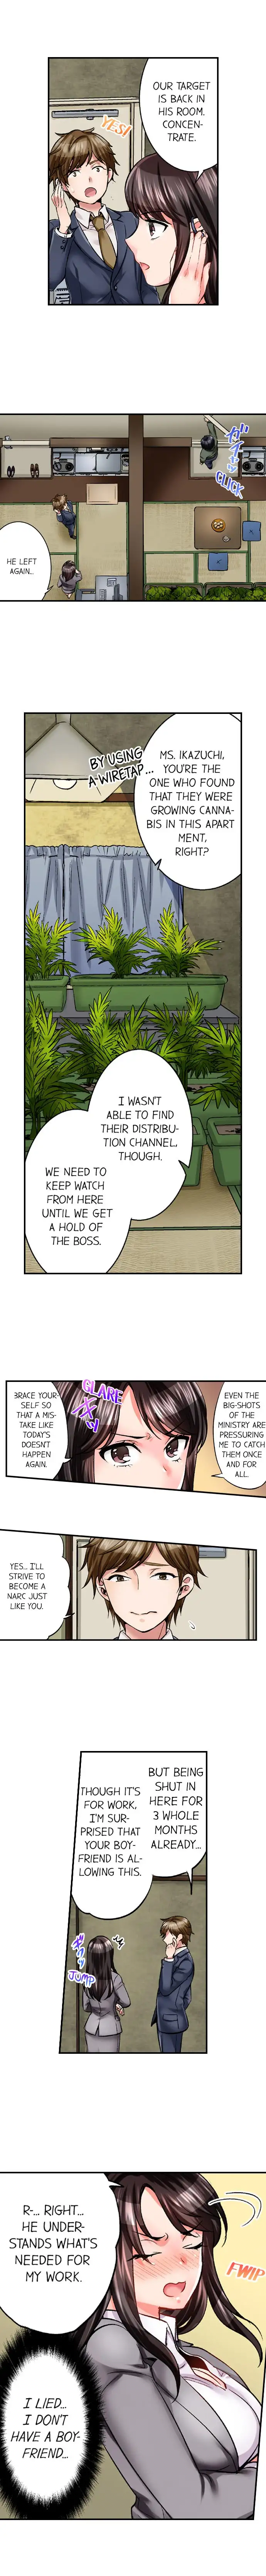 Sex is Part of Undercover Agent’s Job? - Chapter 1 Page 5